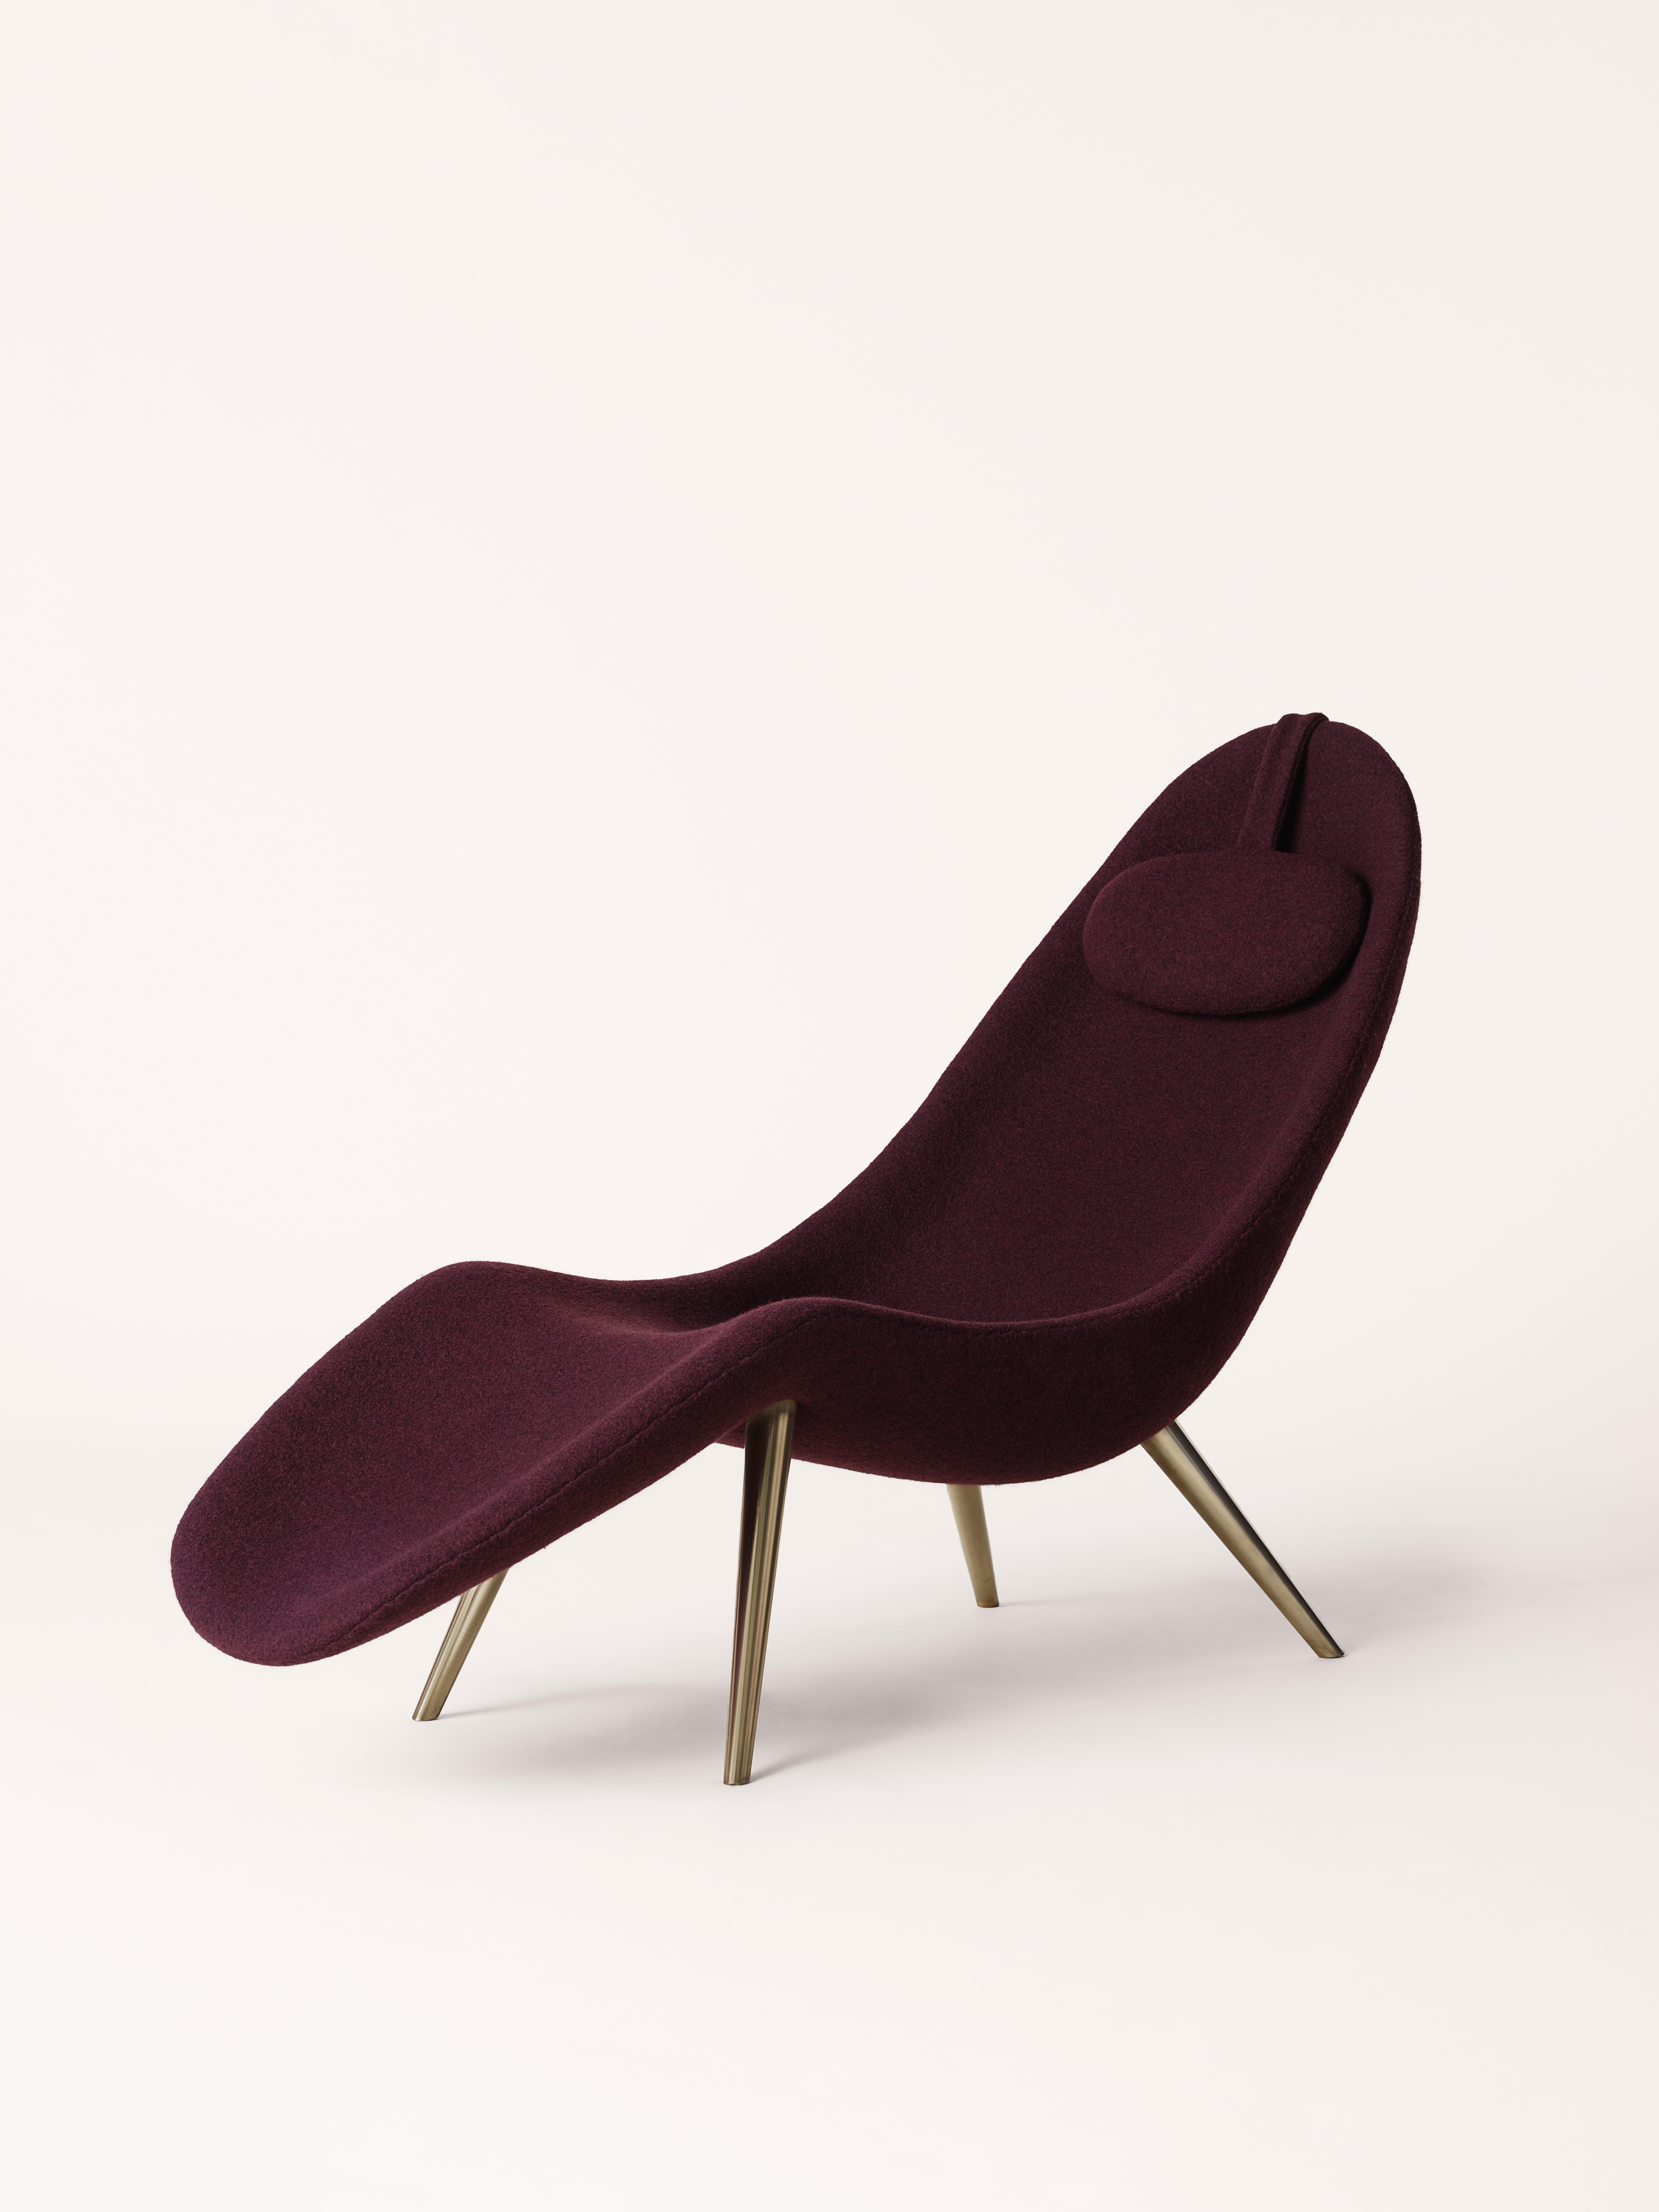 The Pause Chaise Lounge is upholstered with graded-in fabric or COM and features on solid brass legs. With a fiberglass shell designed to embrace the body, the chaise's organic contours complement the human form while creating a feeling of